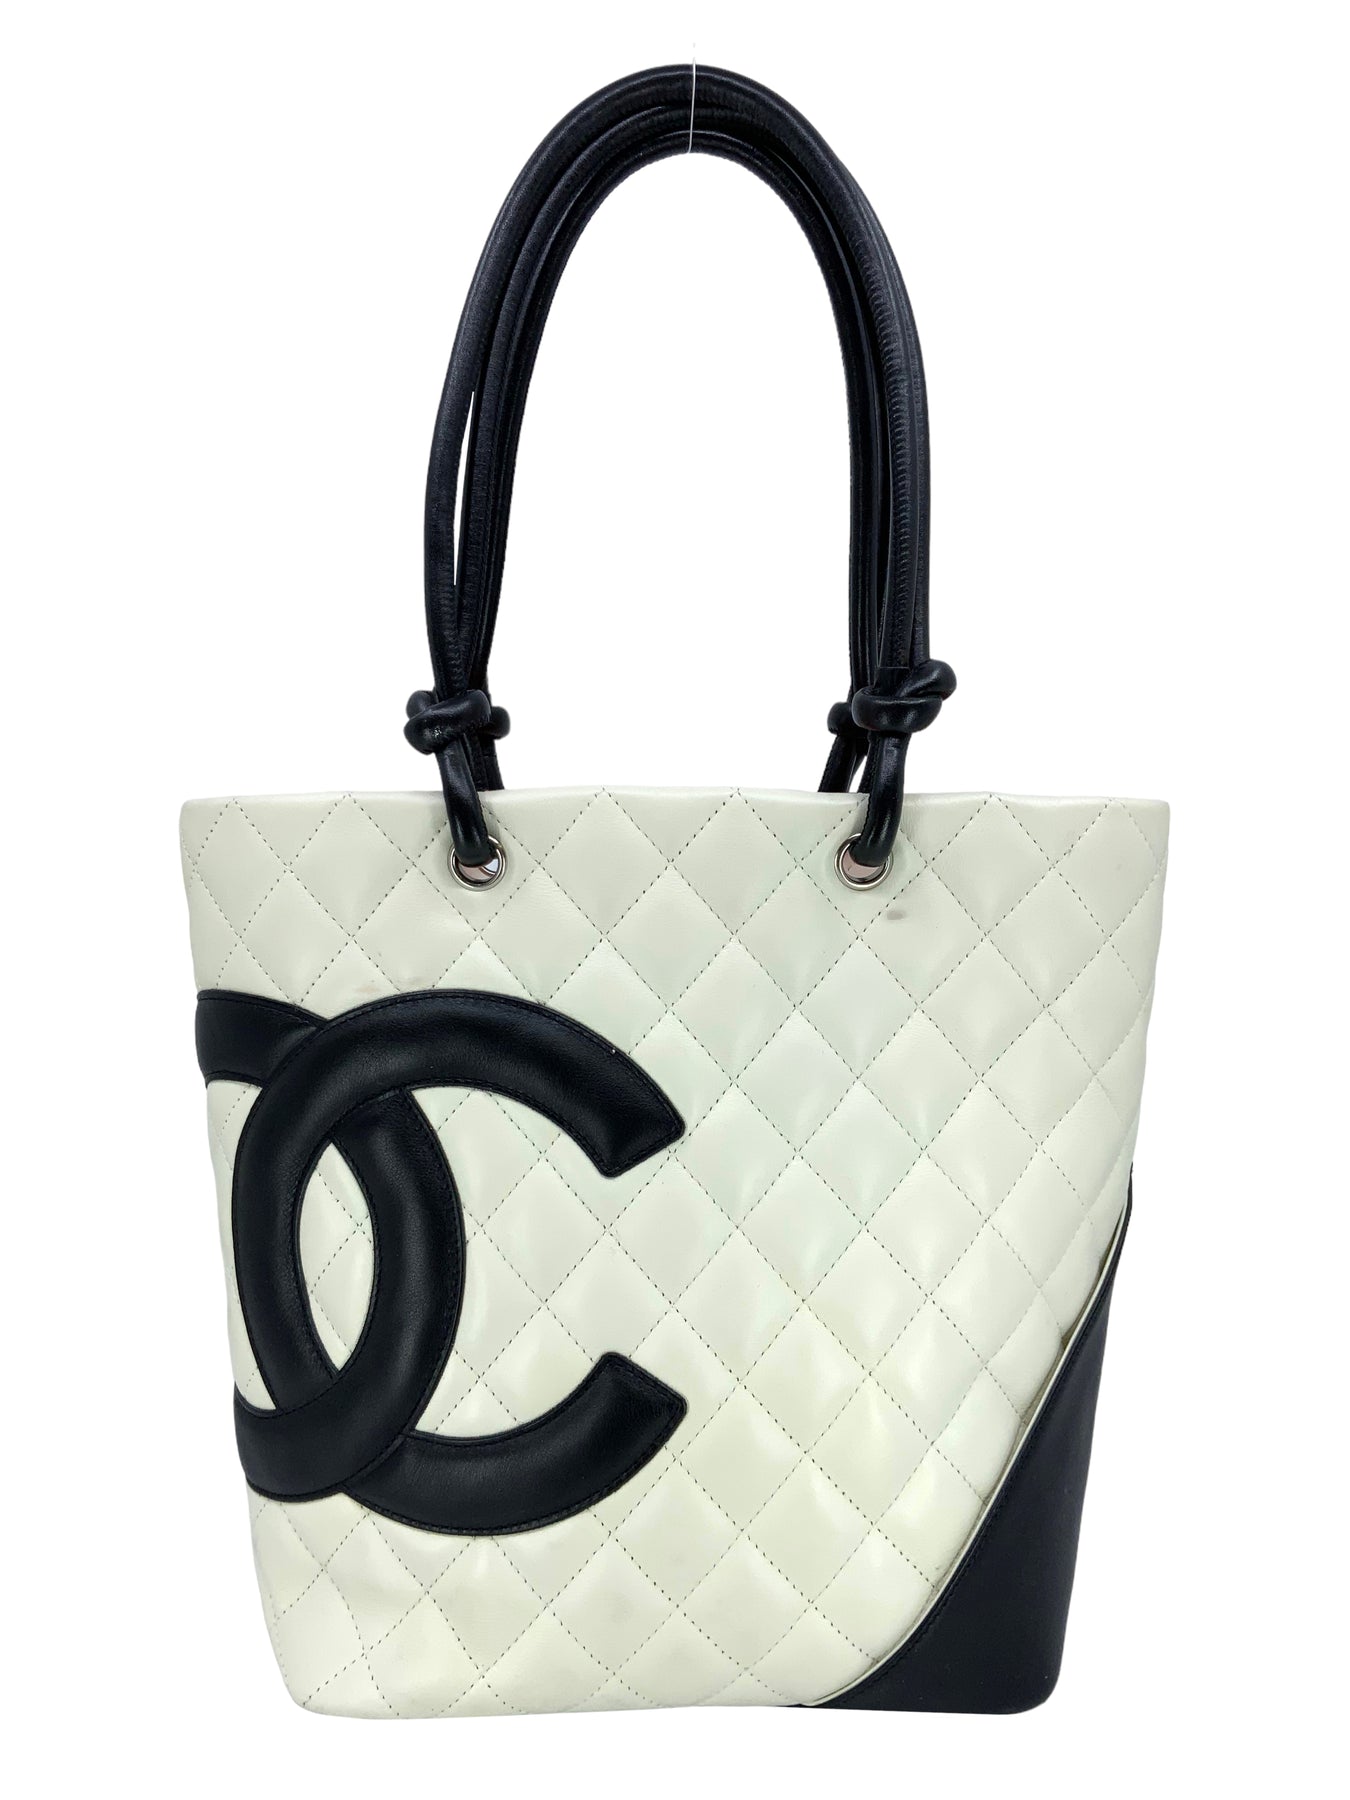 Chanel Quilted Leather Medium Cambon Tote - Consigned Designs